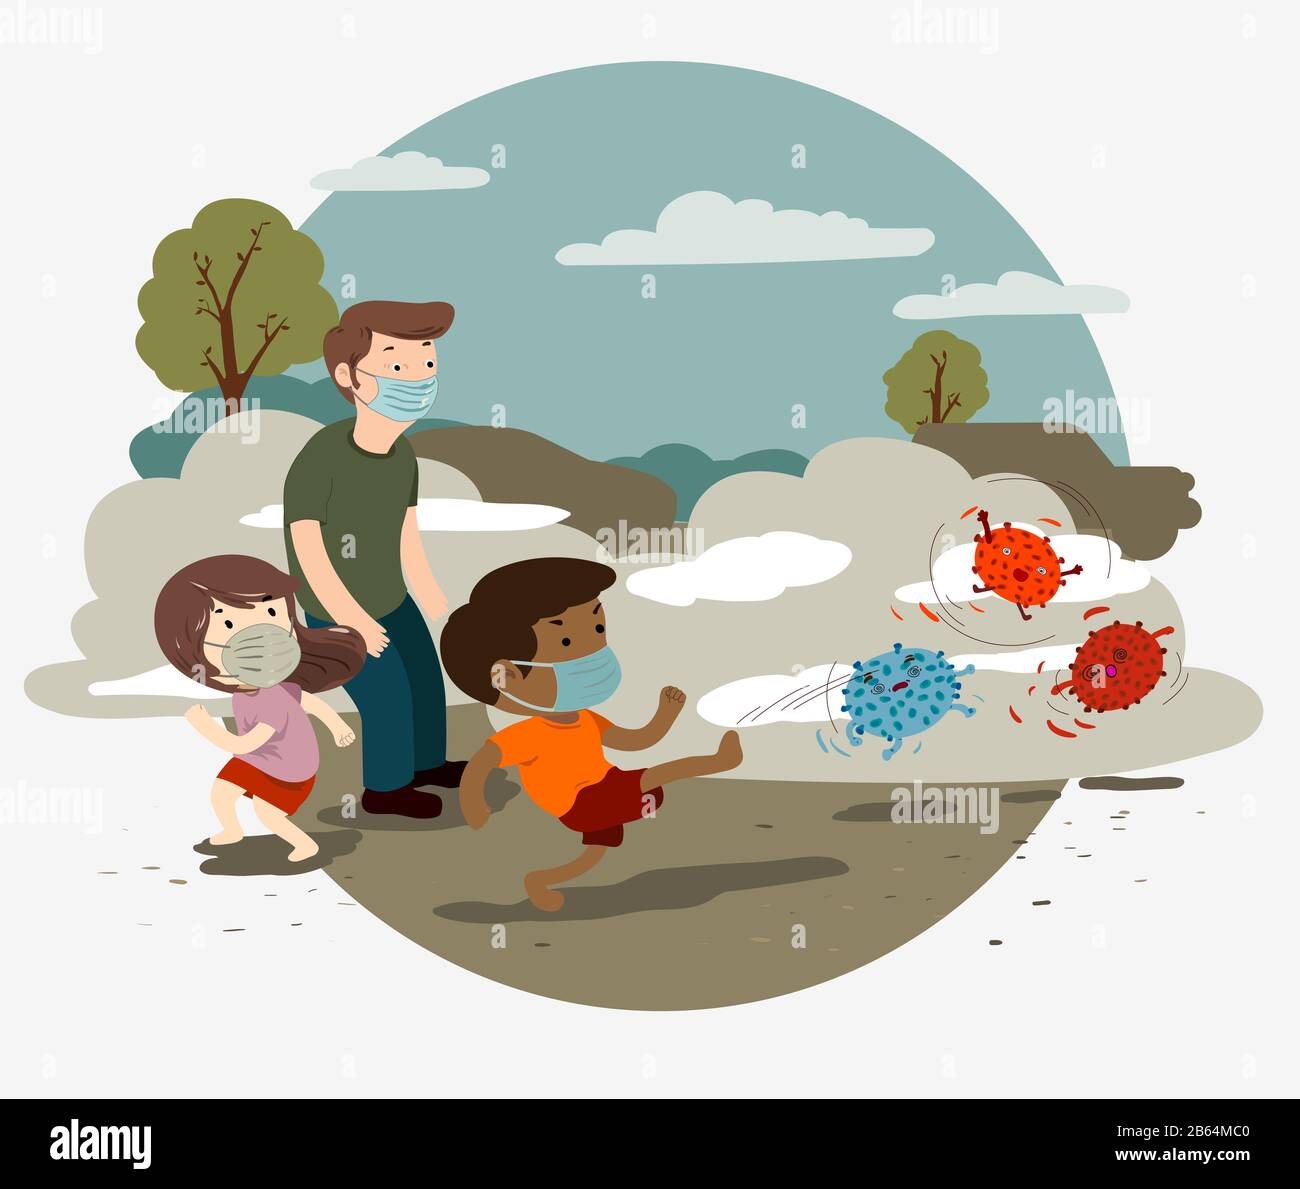 Fight against virus, covid-19, group of people wearing face mask, boy kicks away virus characters. Vector illustration Stock Photo